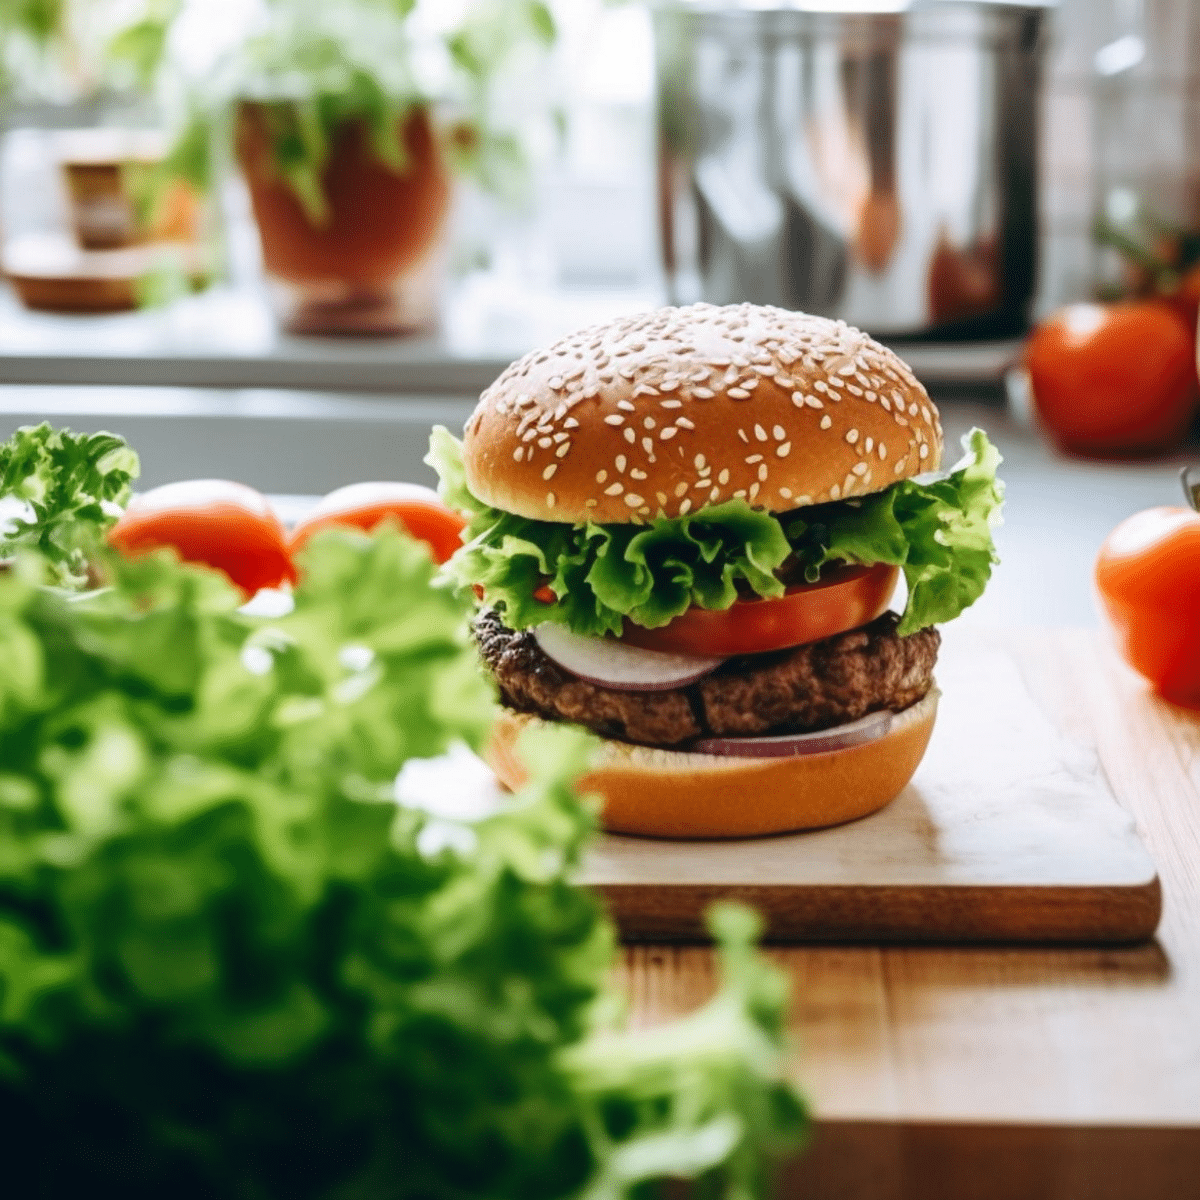 juicy hamburger with all the fixings on a sesame bun in a kitchen with a butcher block counter and plants and a window in the background